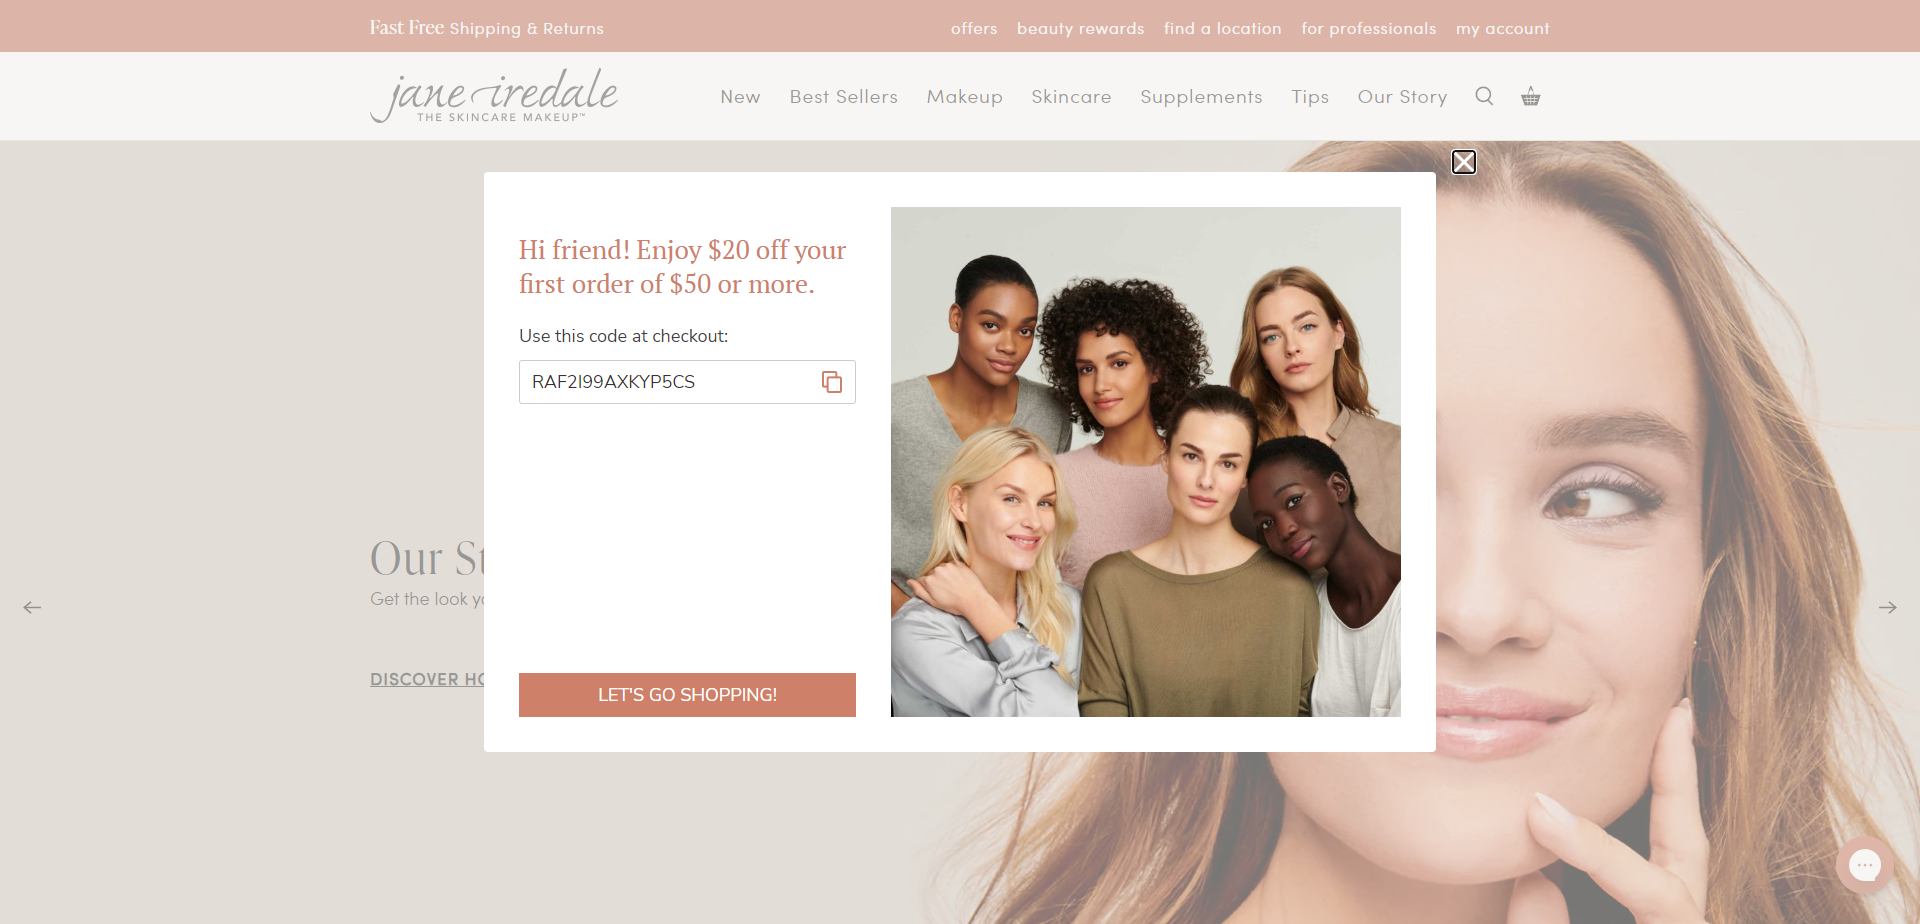 Referral Landing Page for Jane Iredale